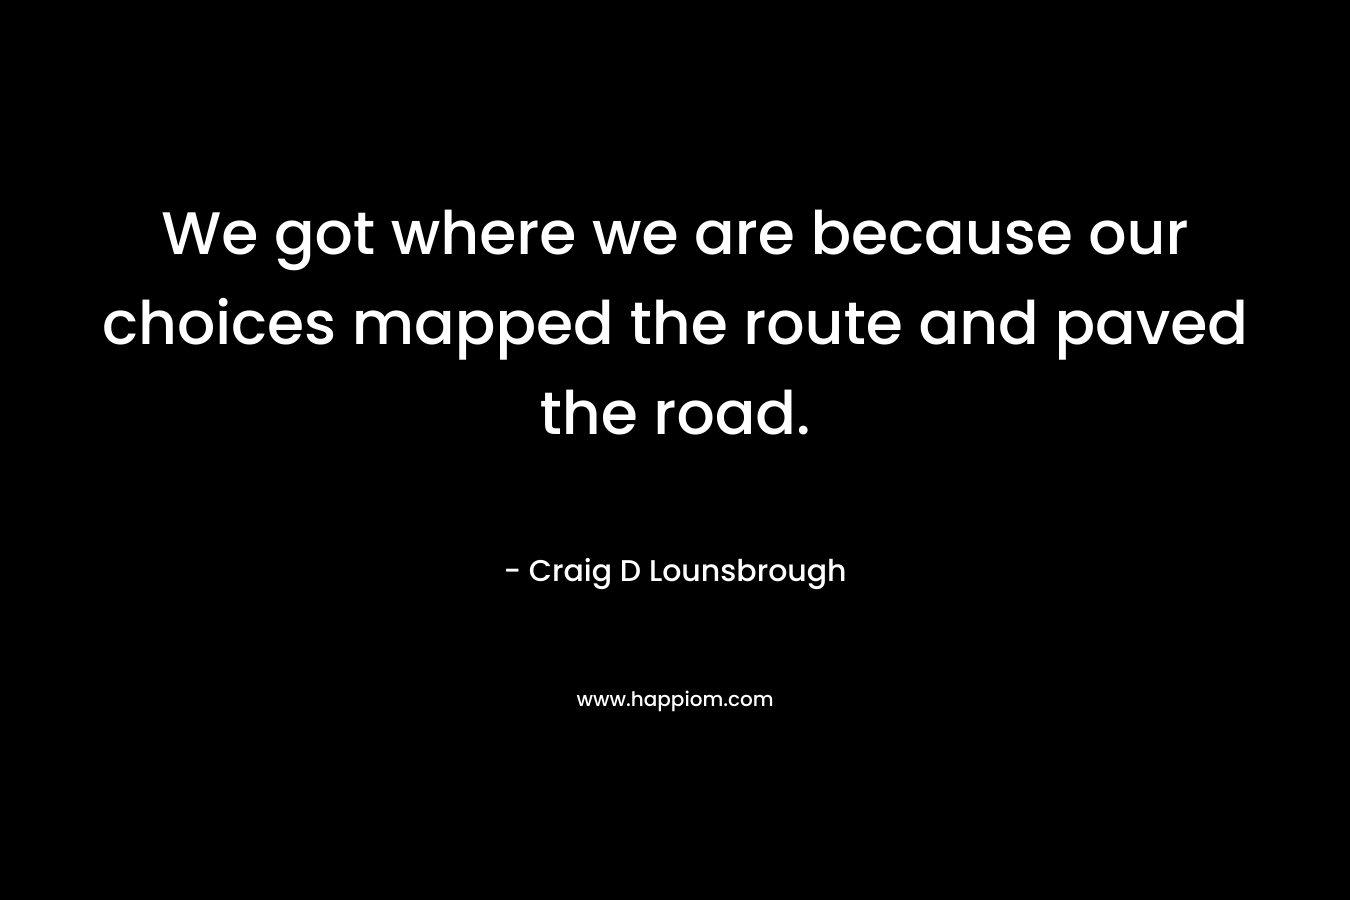 We got where we are because our choices mapped the route and paved the road.